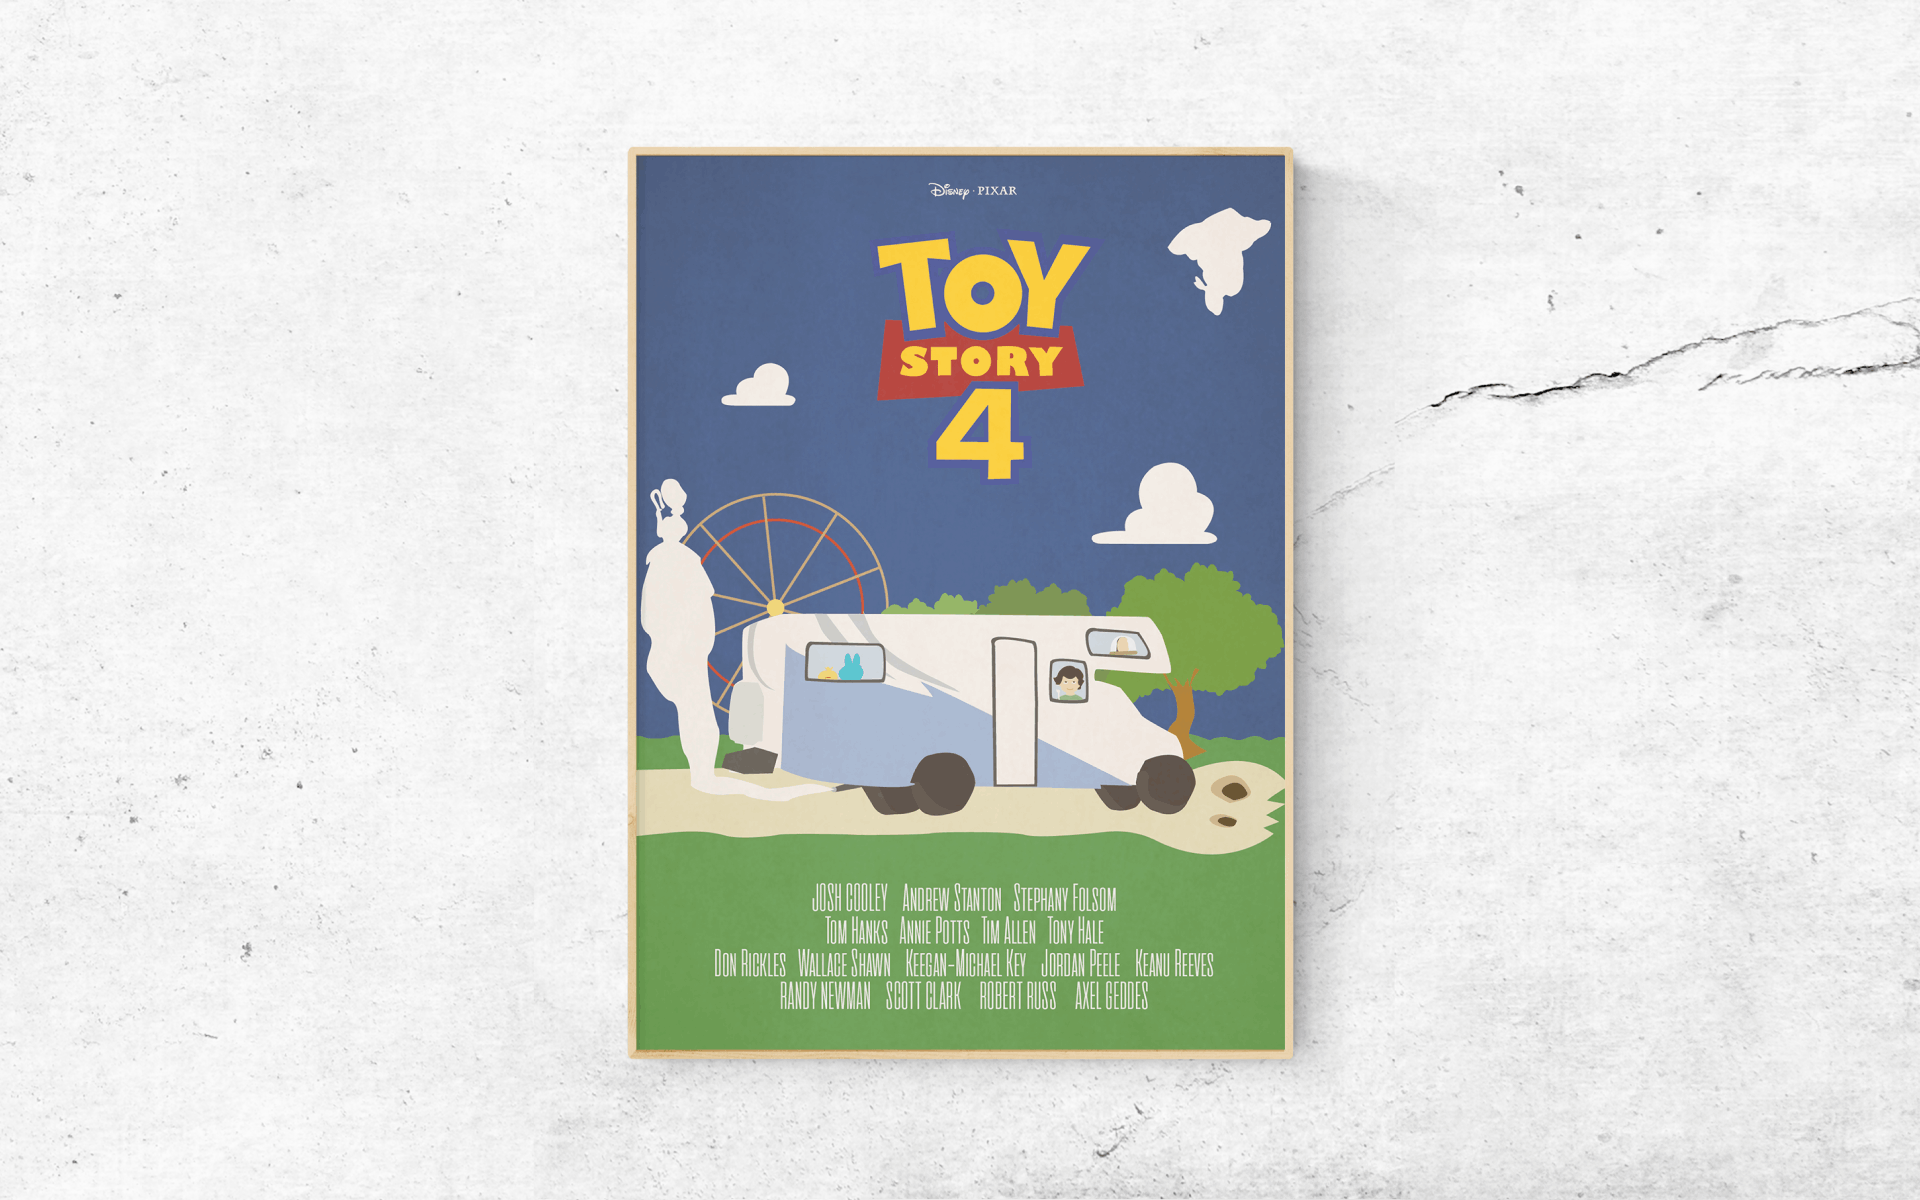 Toy story 4 movie poster